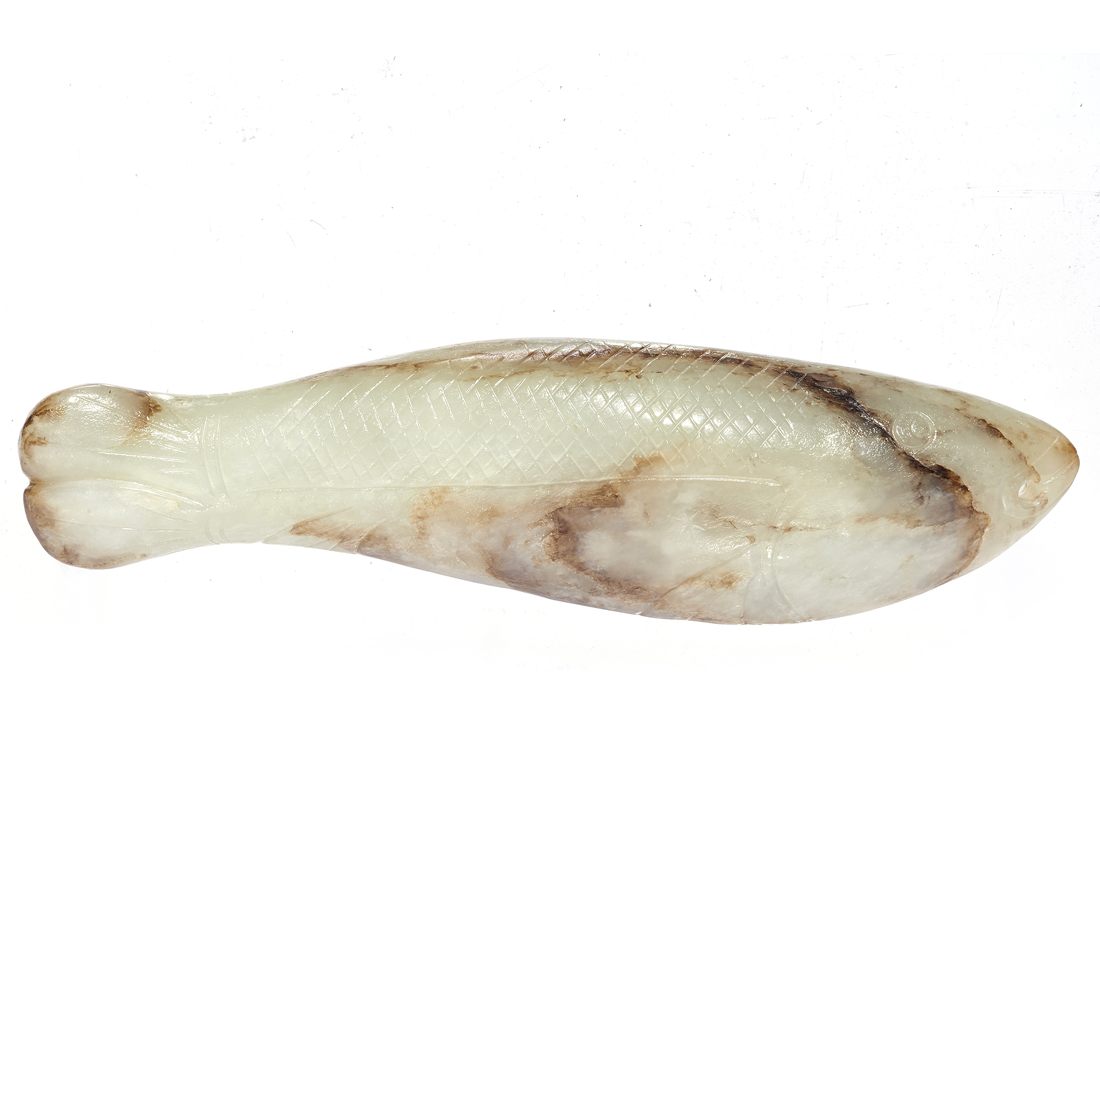 CHINESE RUSSET JADE FISH-FORM TOGGLE